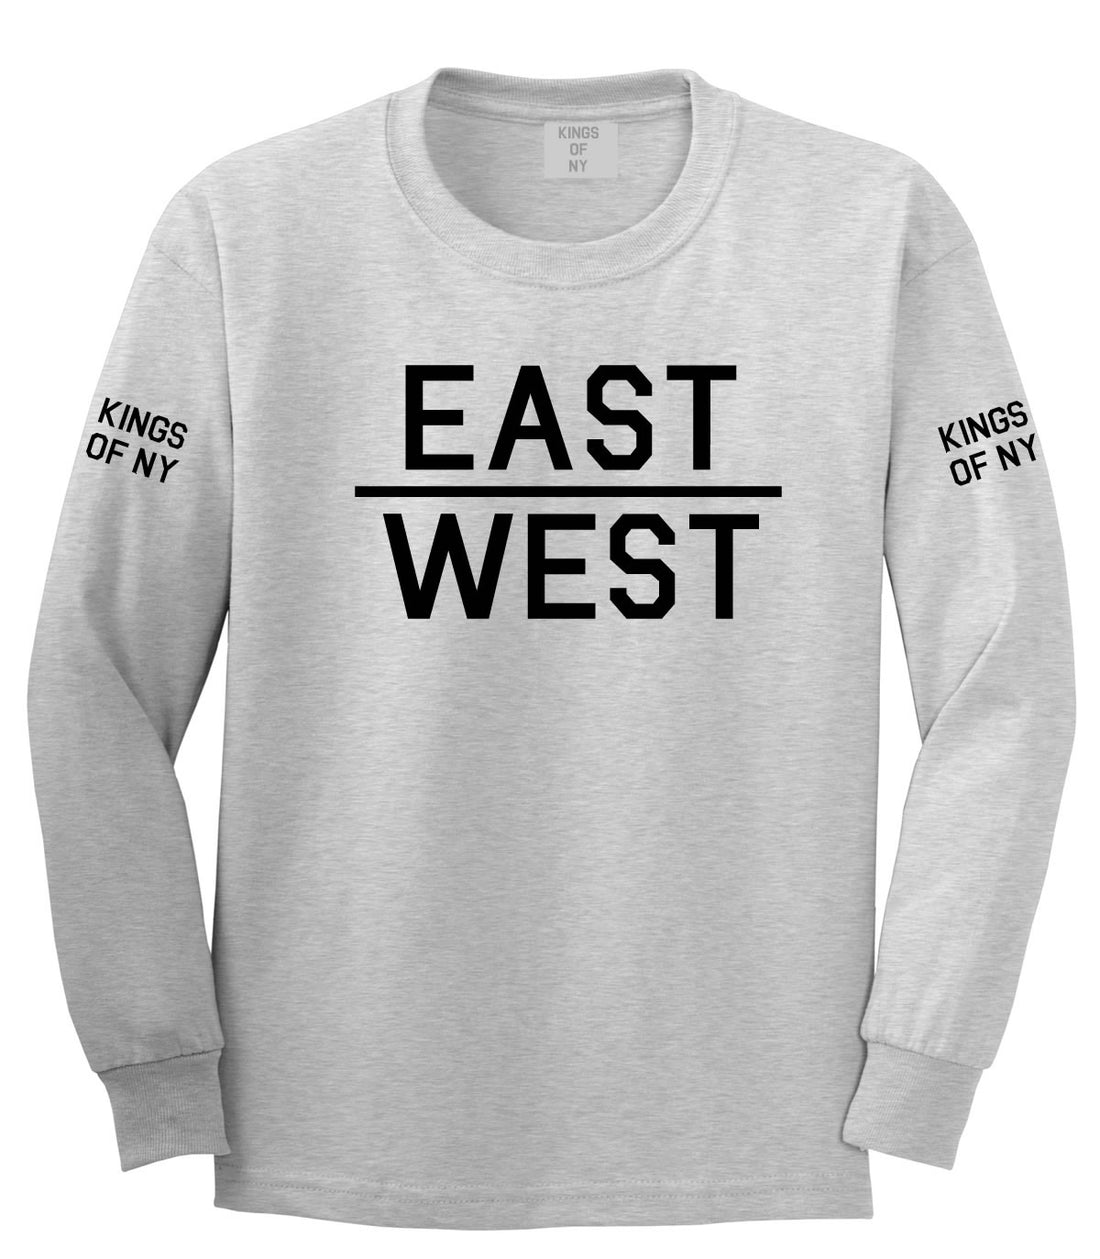 East West Long Sleeve T-Shirt in Grey by Kings Of NY